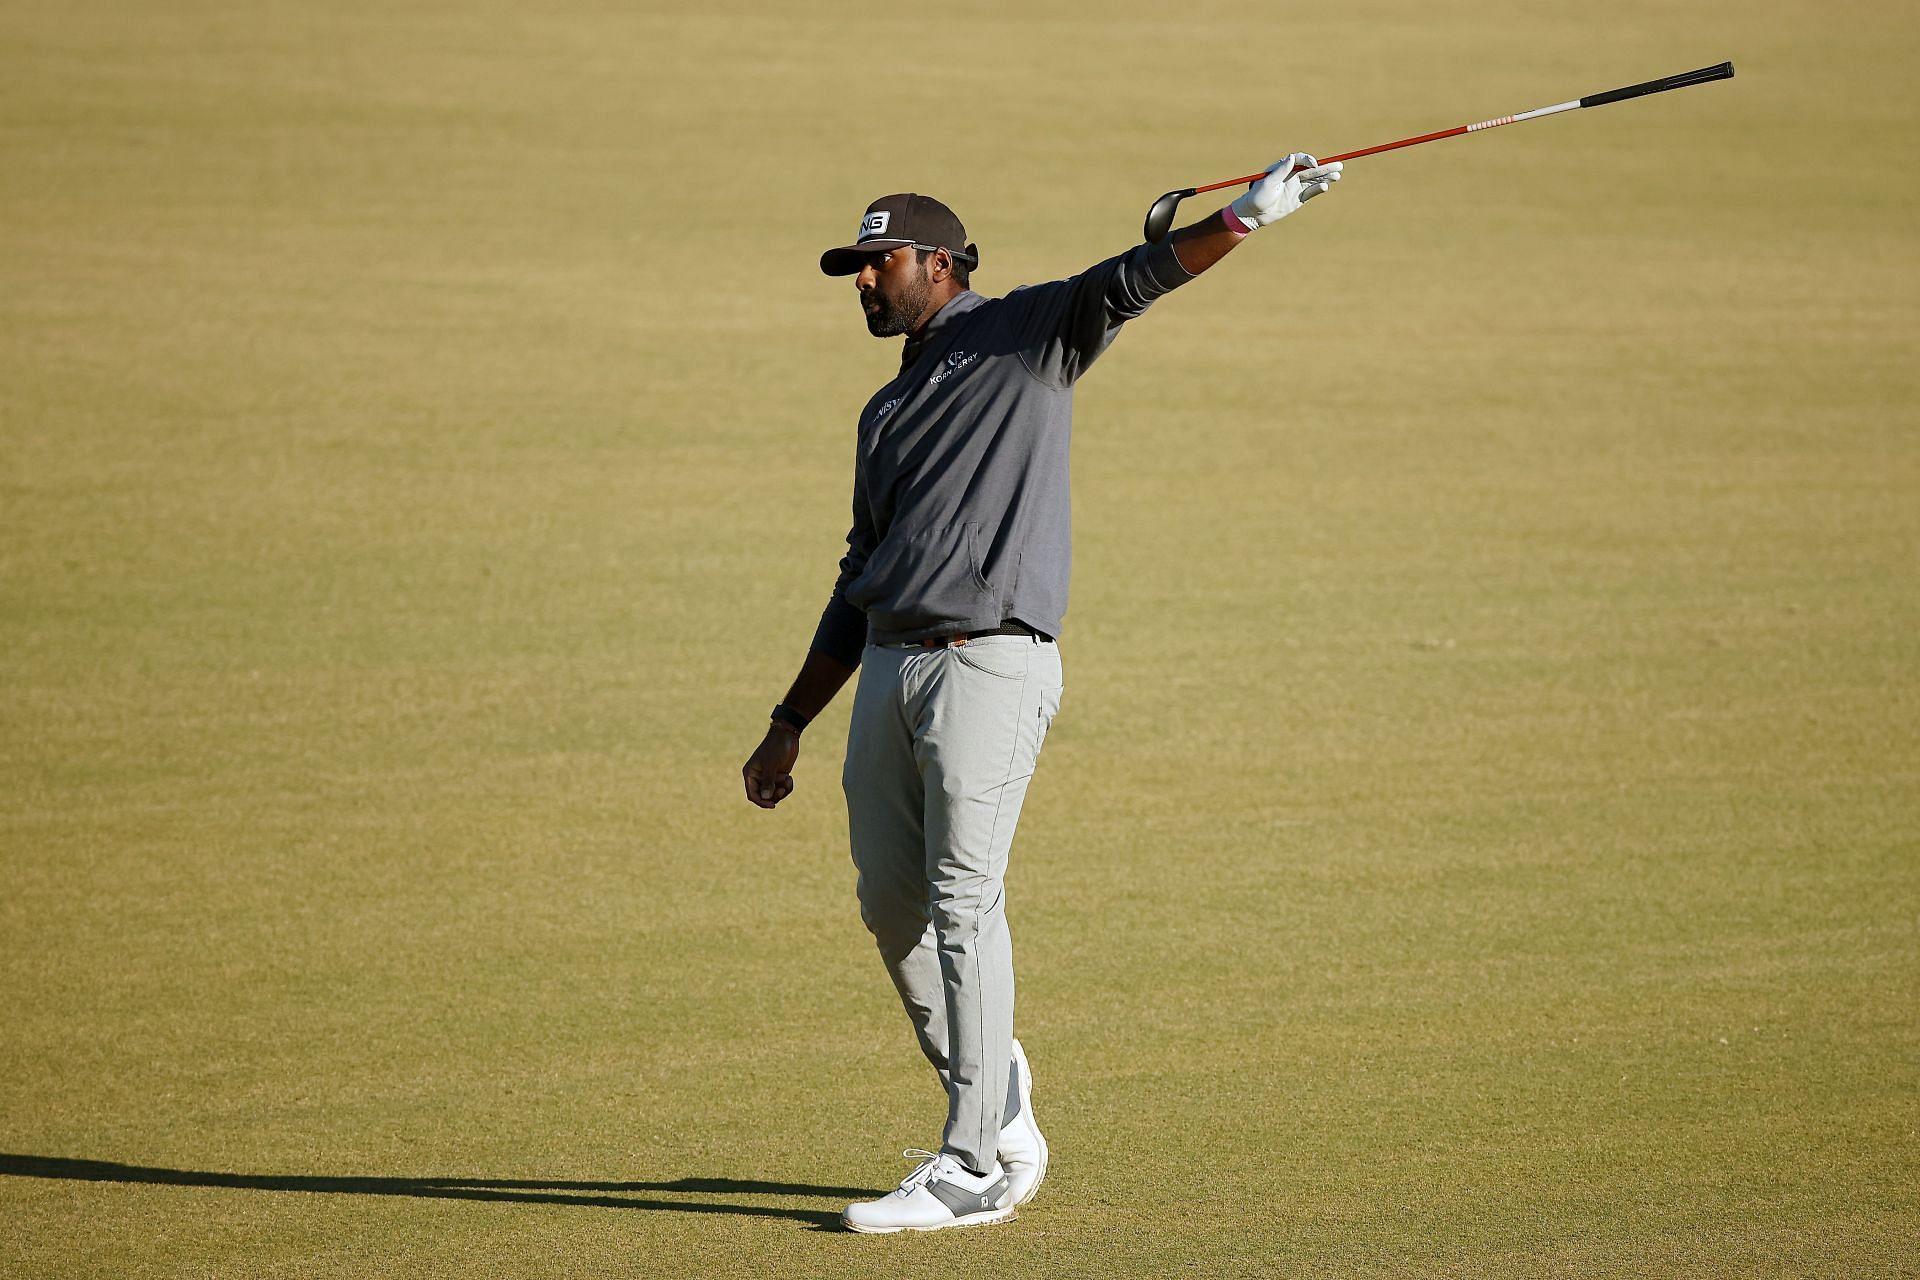 Sahith Theegala at The CJ Cup - Round Two (Image via Mike Mulholland/Getty Images for The CJ Cup)